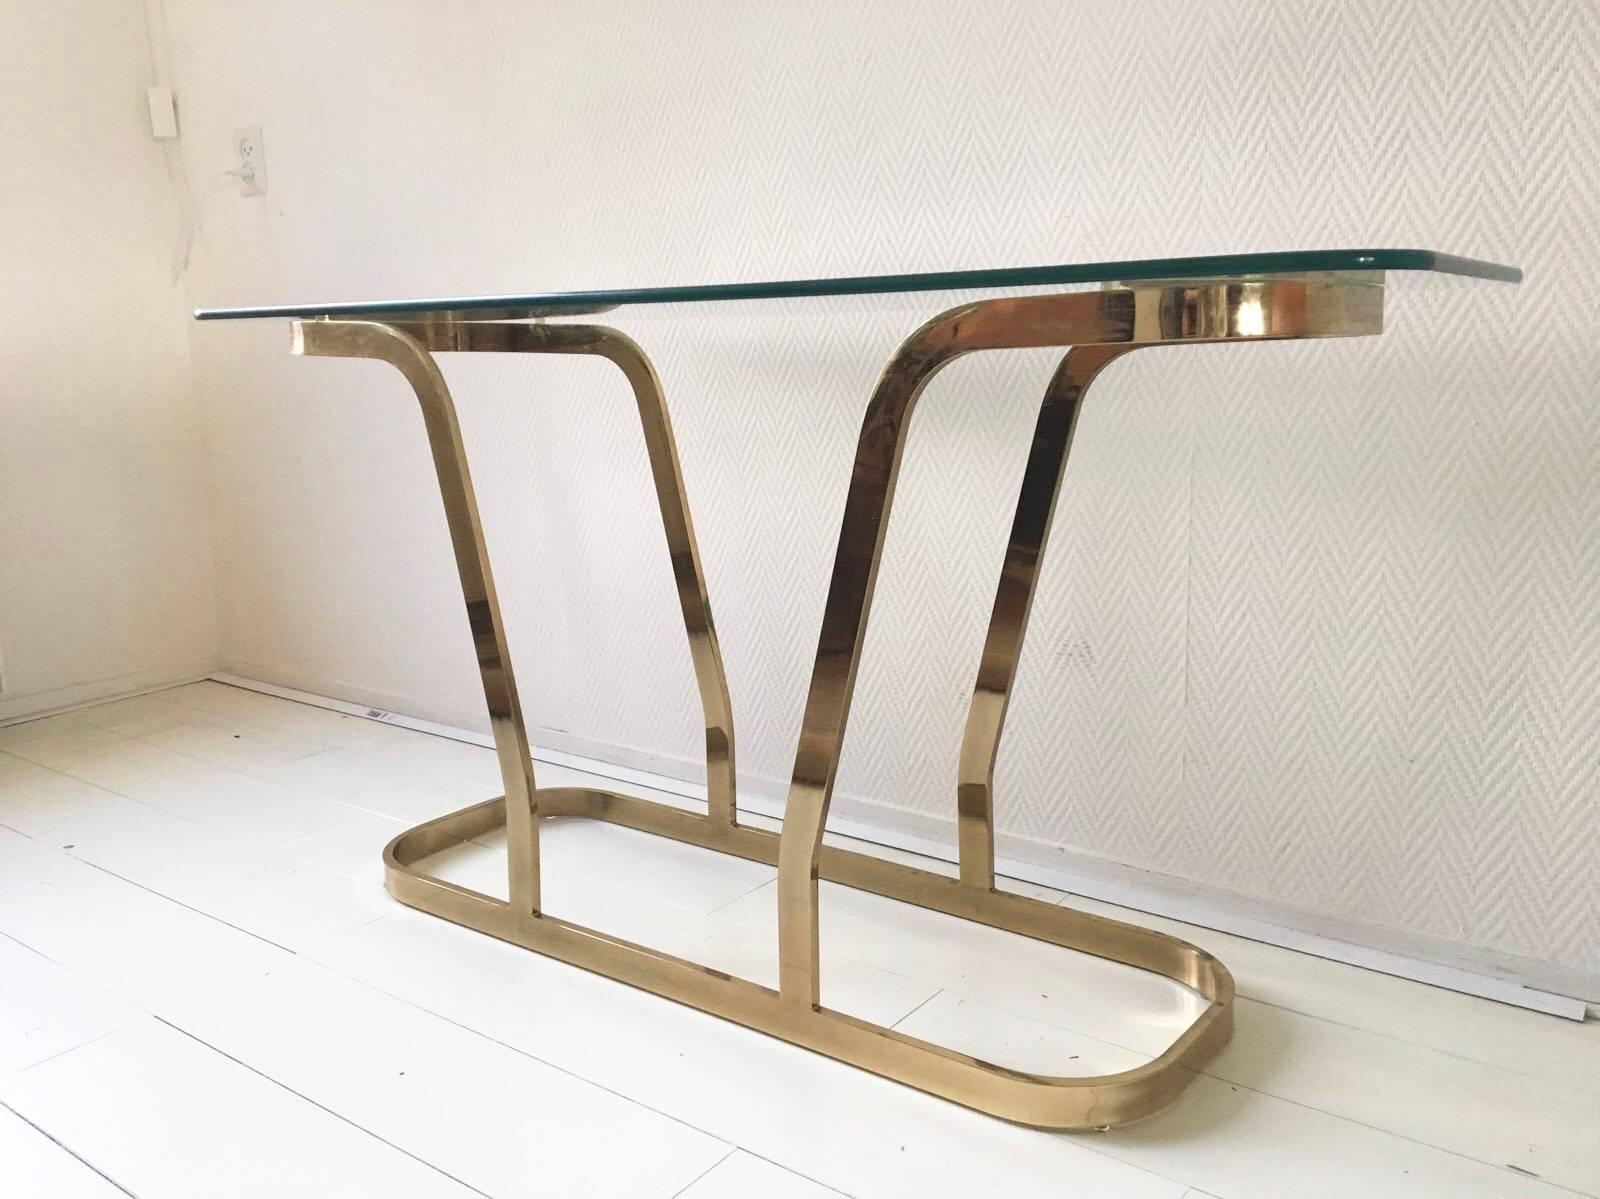 European Hollywood Regency Brass and Glass Oval Modern Console or Entry Table, 1970s